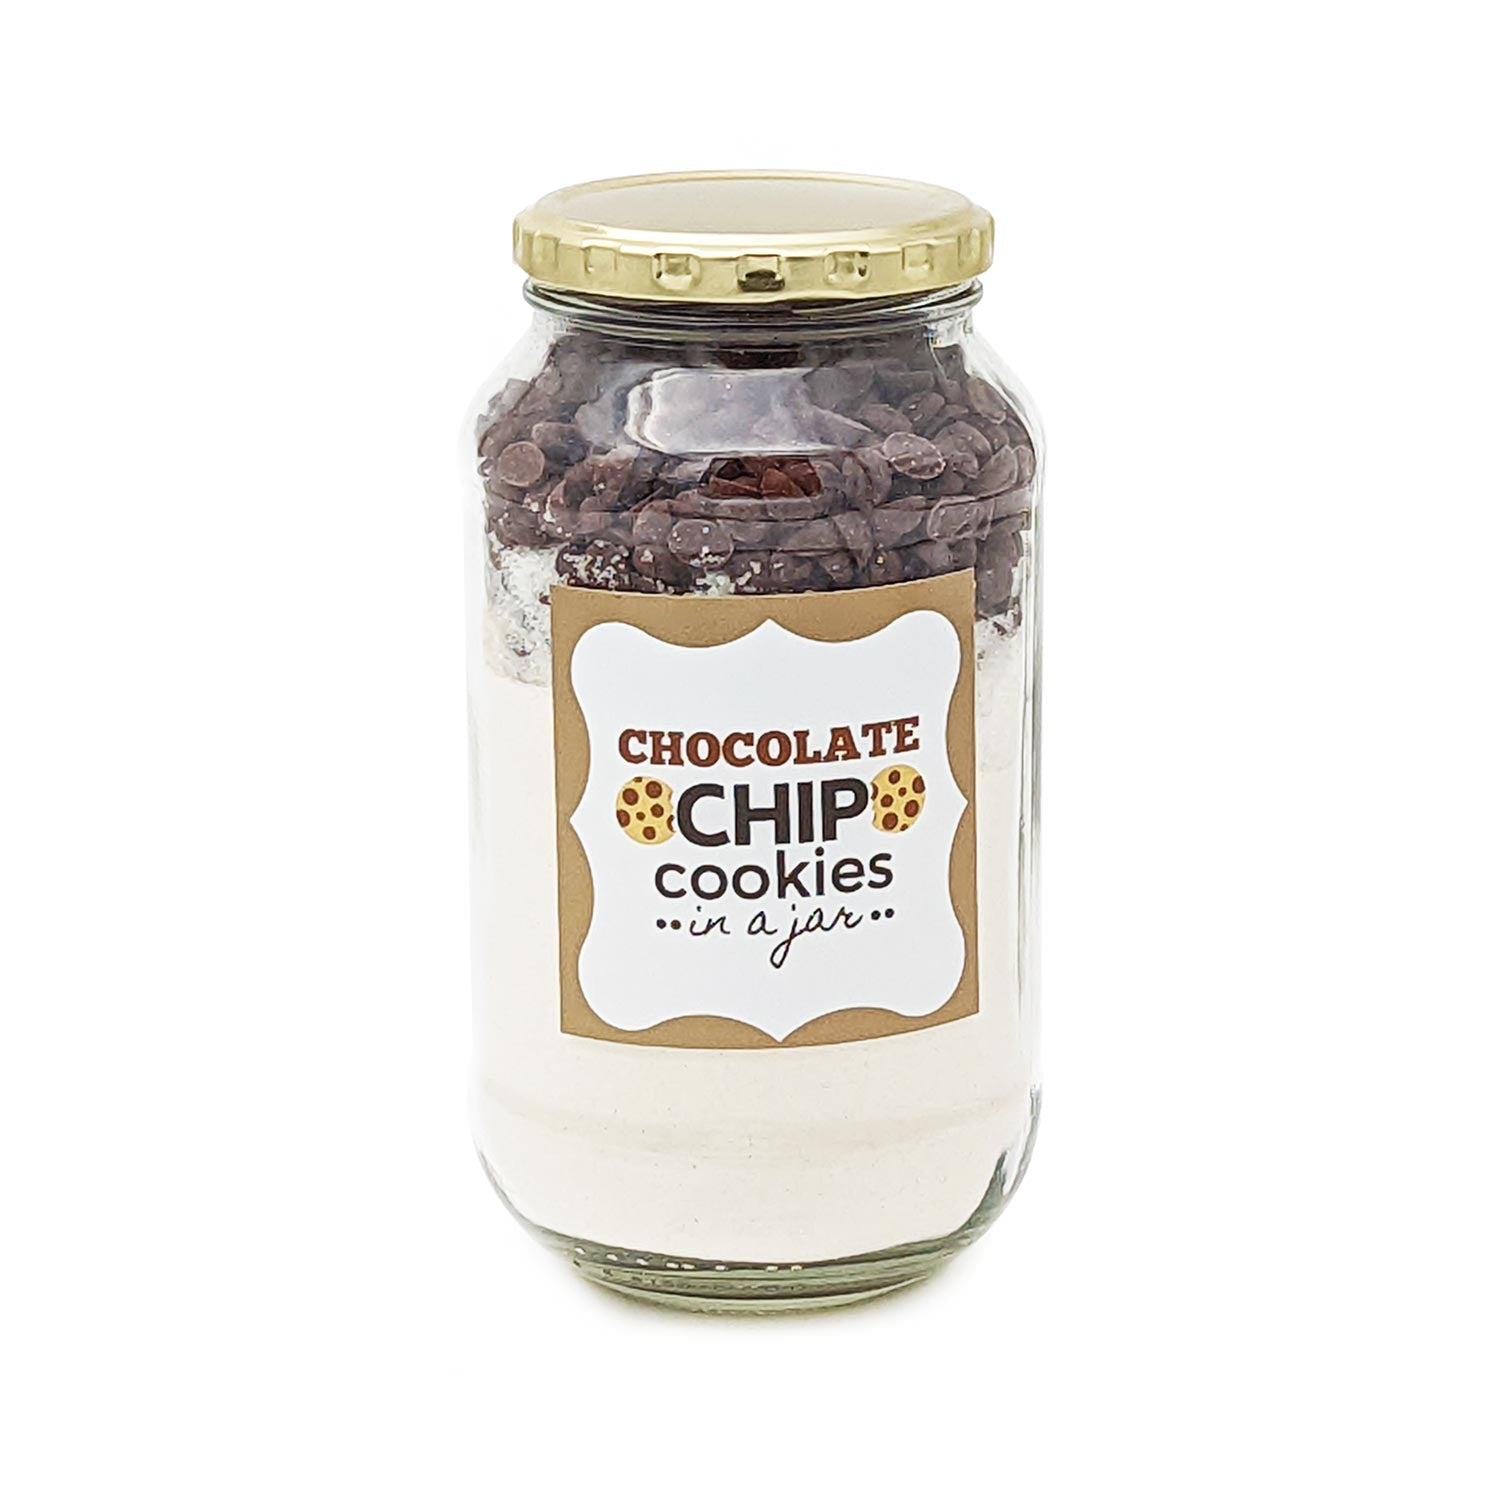 Gifts in a Jar Chocolate Chip Cookies Chocolate Gifts in a Jar